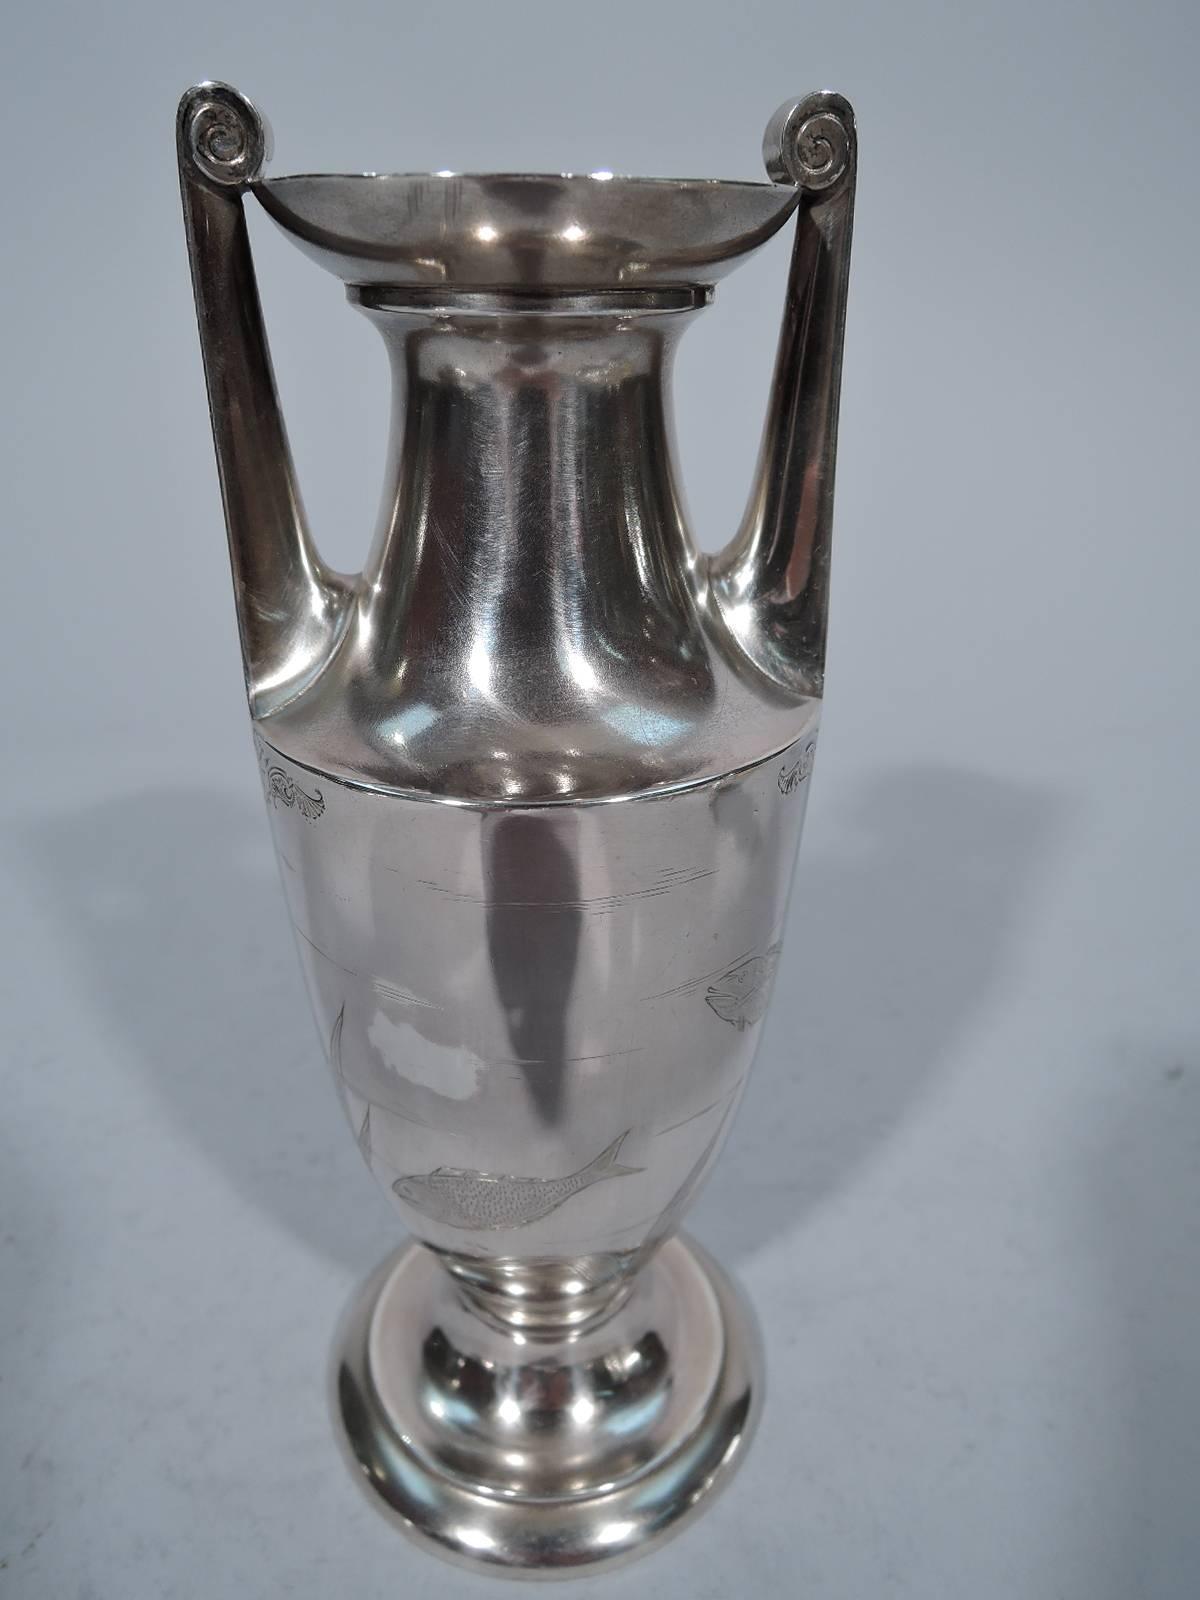 Japonesque sterling silver vase. Made by Gorham in Providence in 1876. Amphora with tapering sides, stepped foot, flared rim and vertical side handles terminating in volute scrolls. Fish and marine plants engraved on body. Arms have stylized Modern